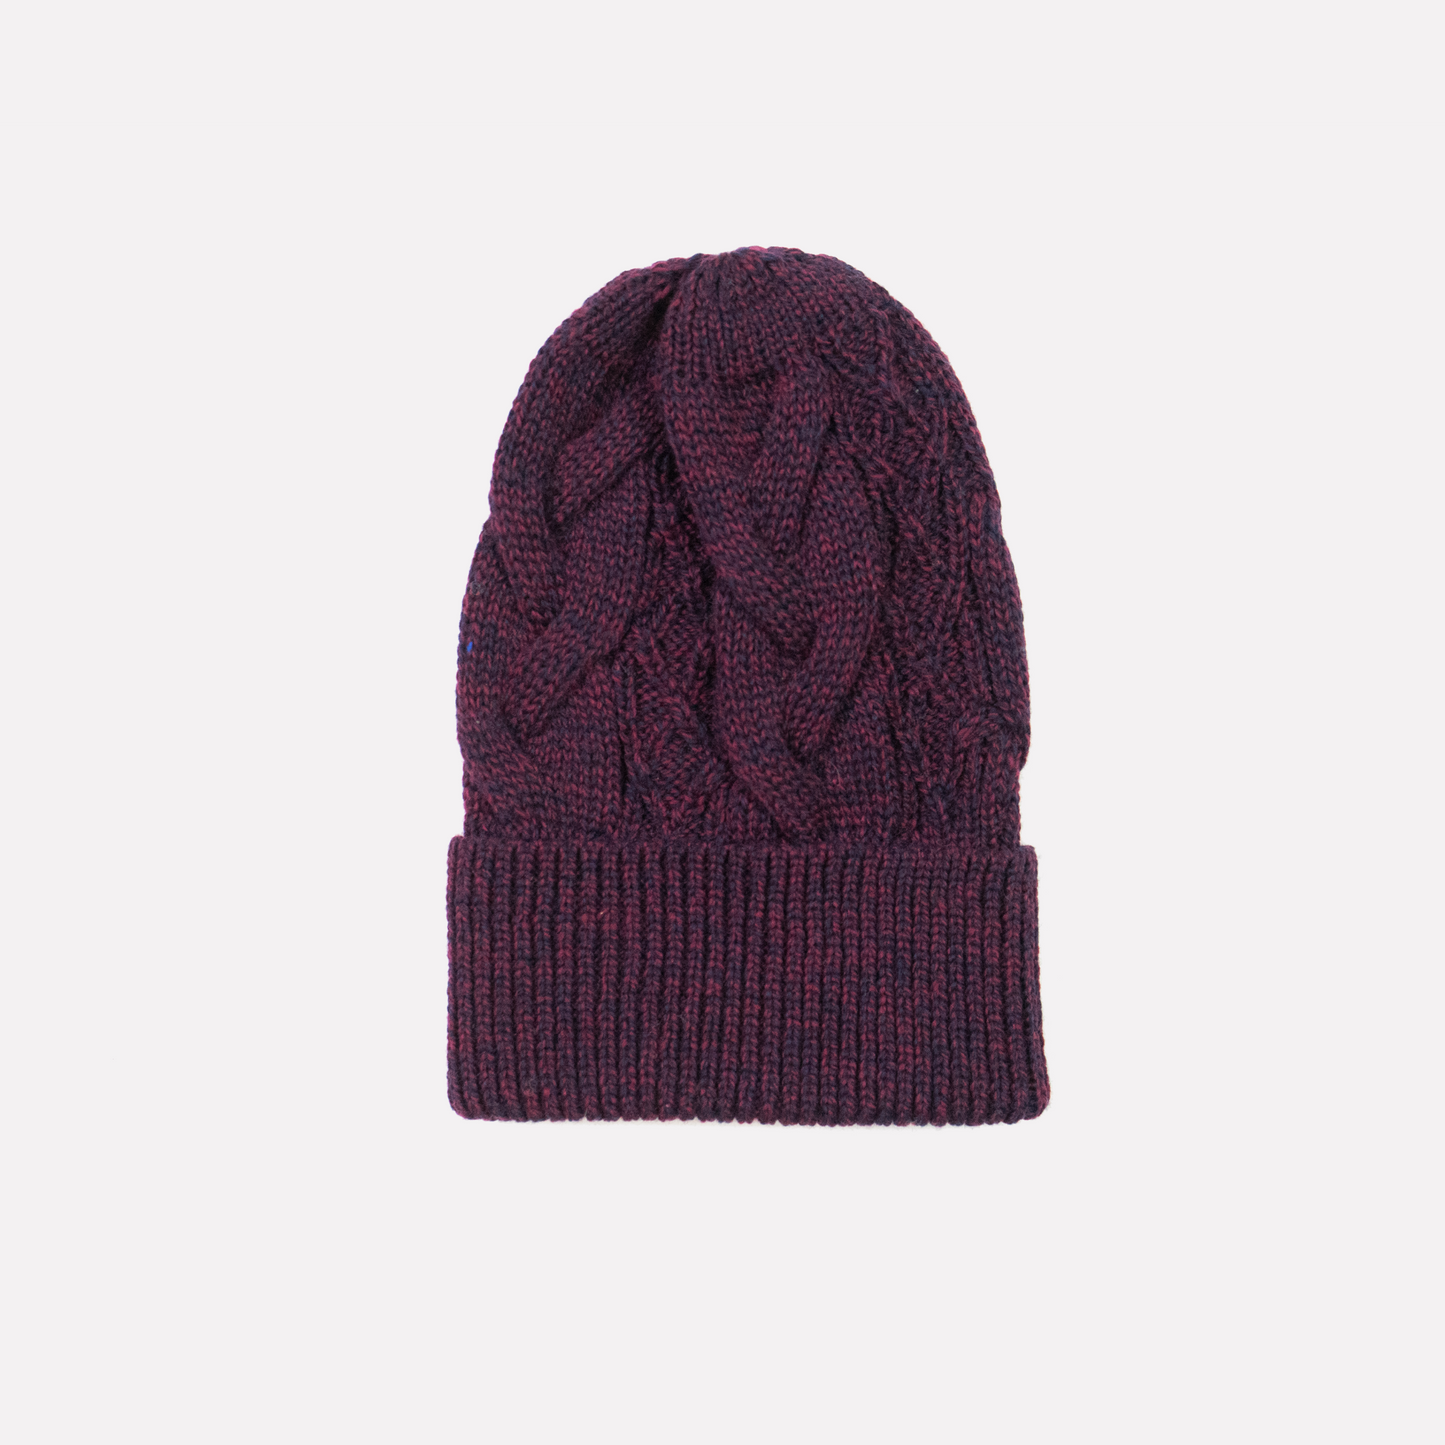 Cable Hat in Burgundy Marl